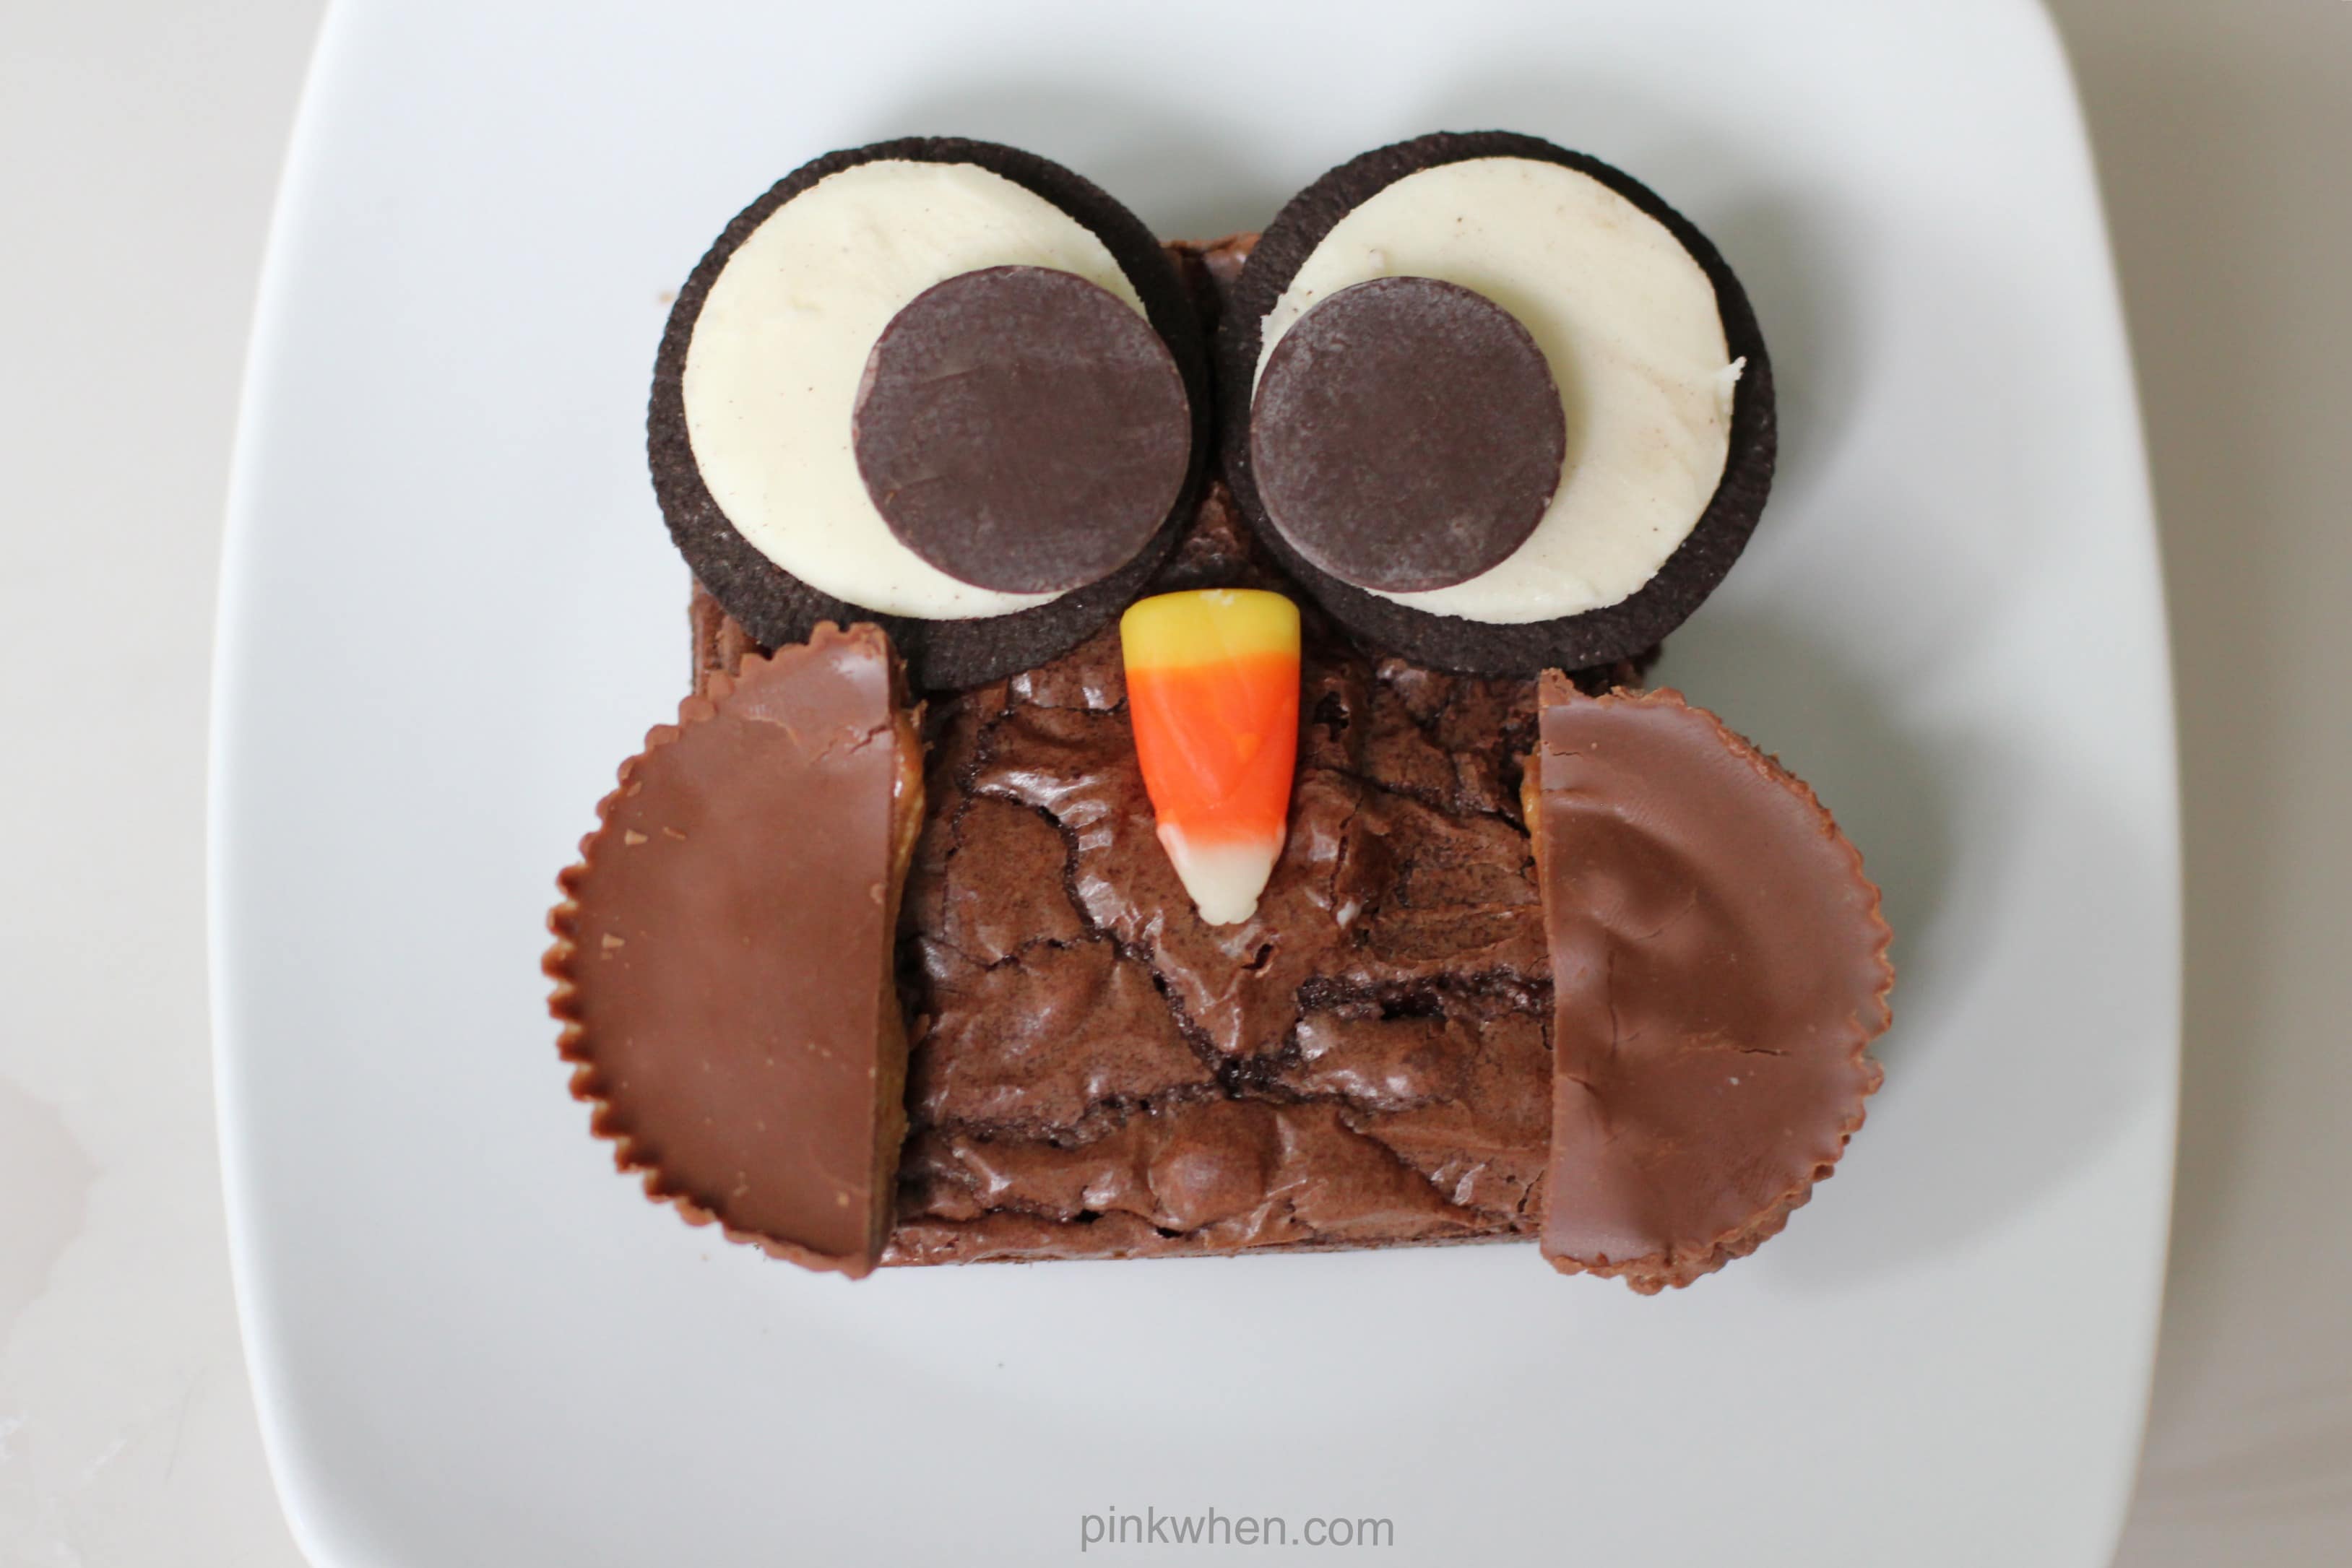 Delicious Brownie Owl treat from PinkWhen.com